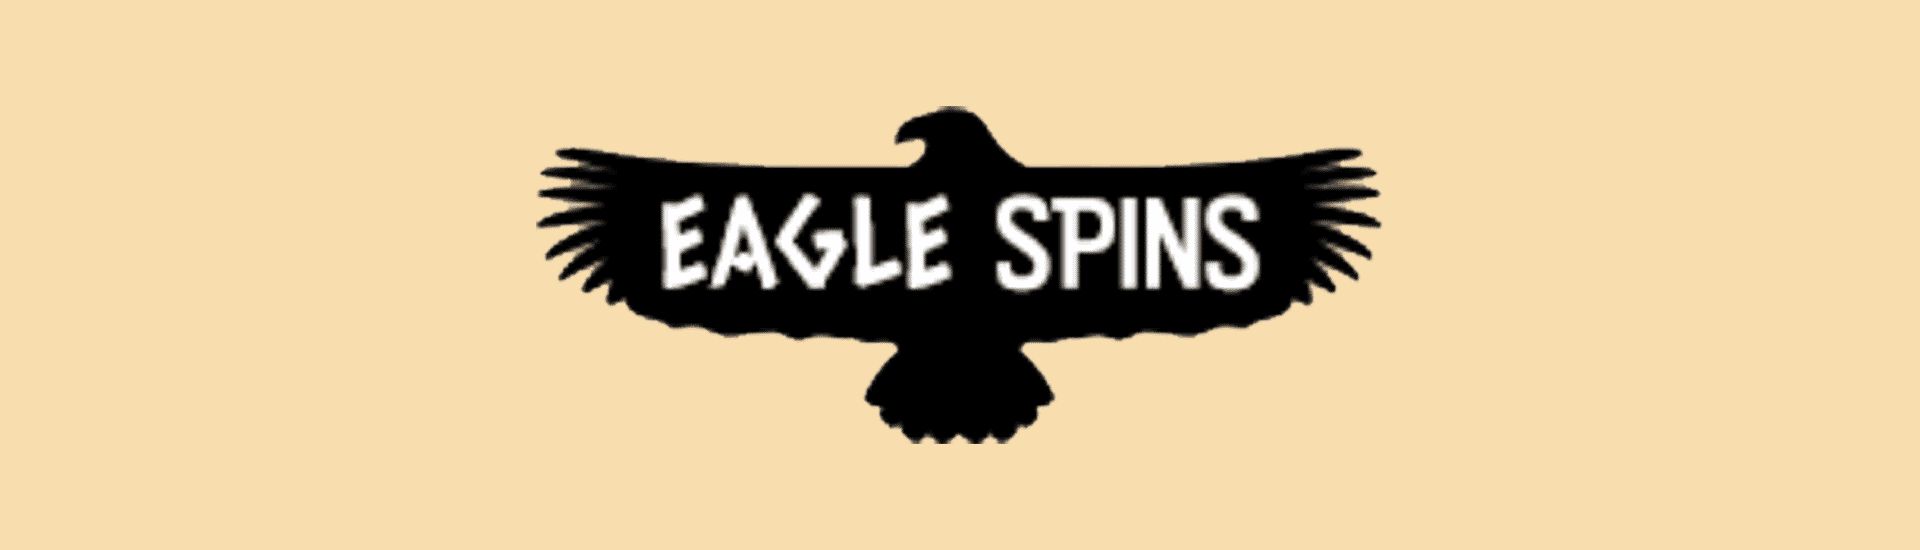 Eagle Spins Featured Image